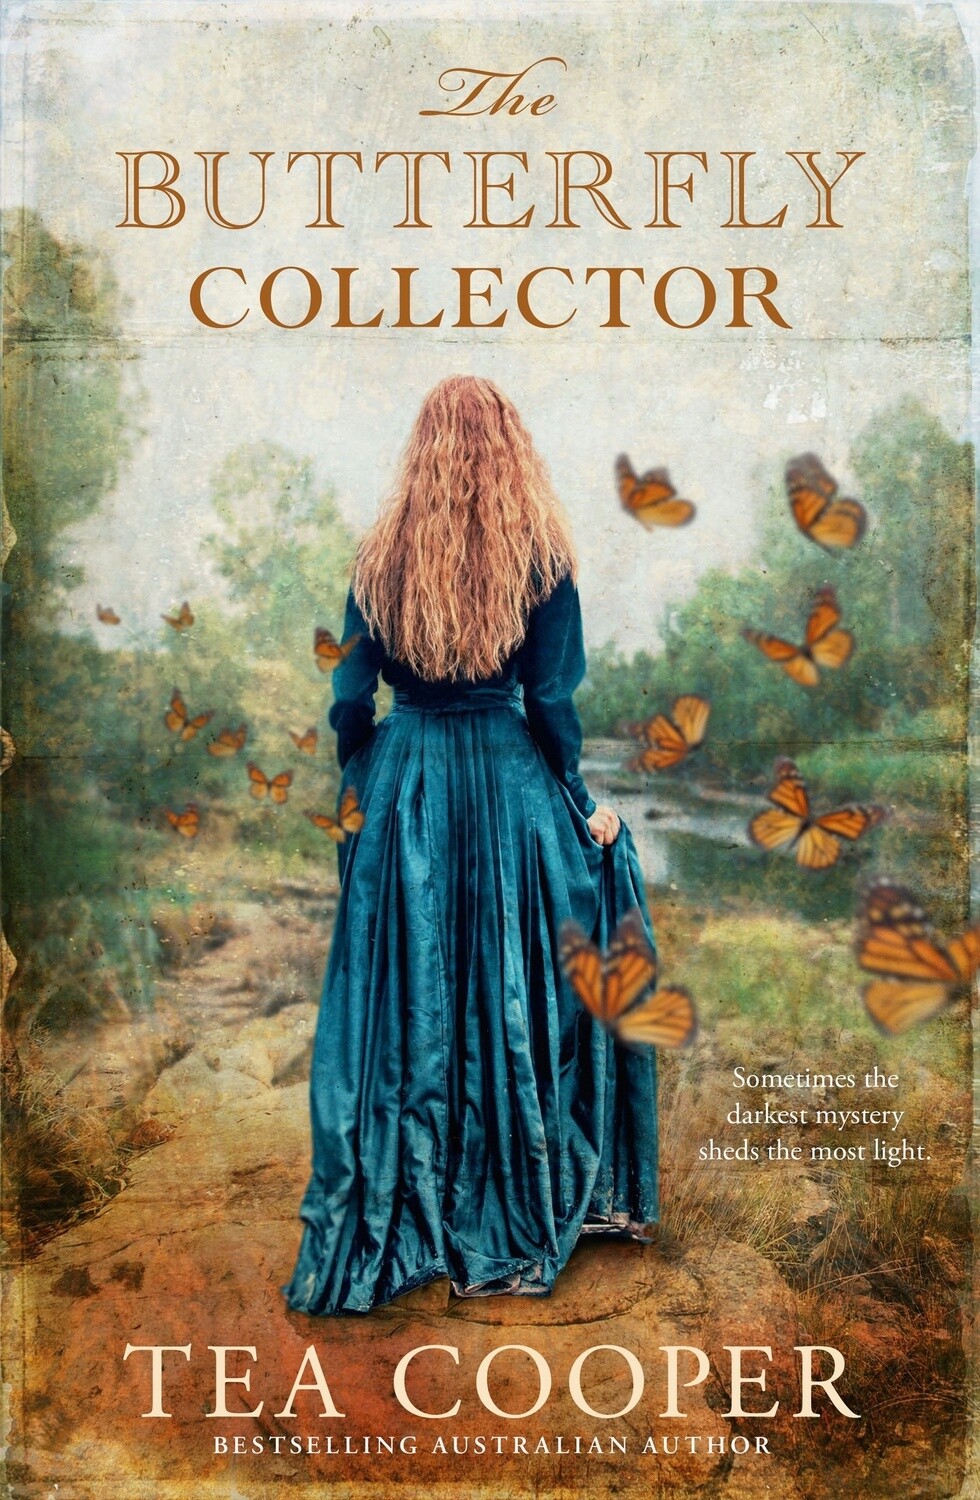 The Butterfly Collector by Tea Cooper